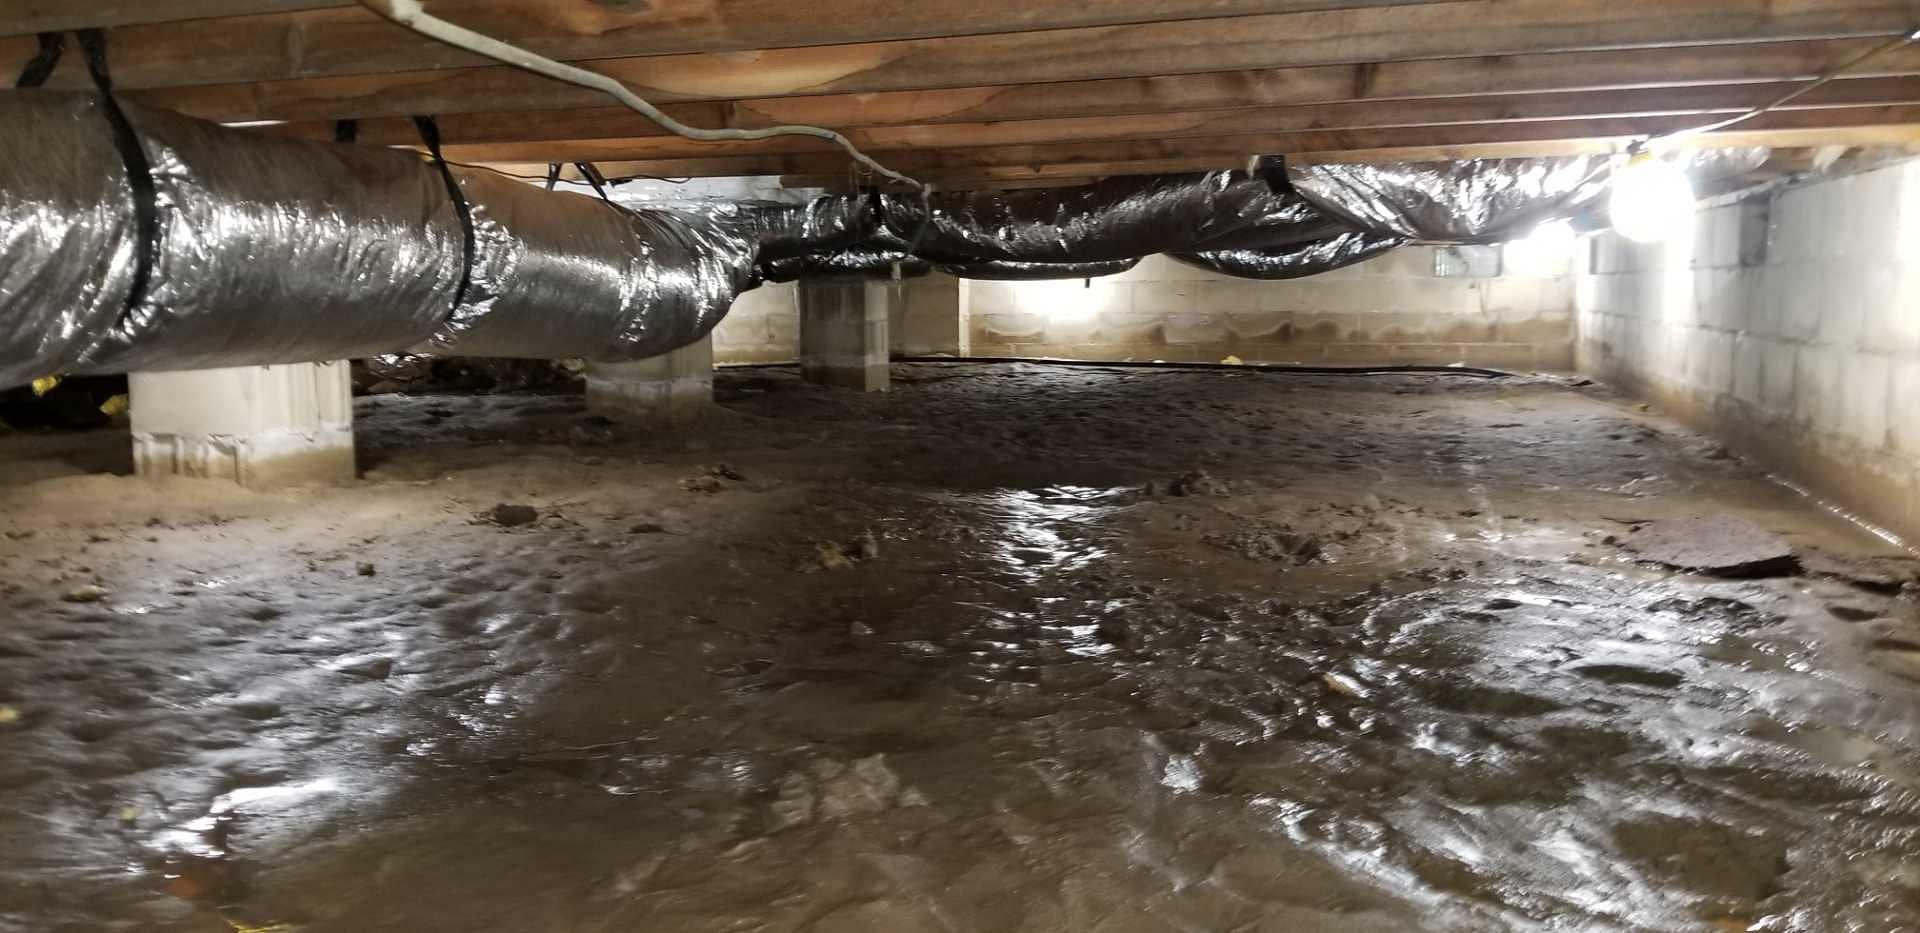 A flooded crawl space under a home